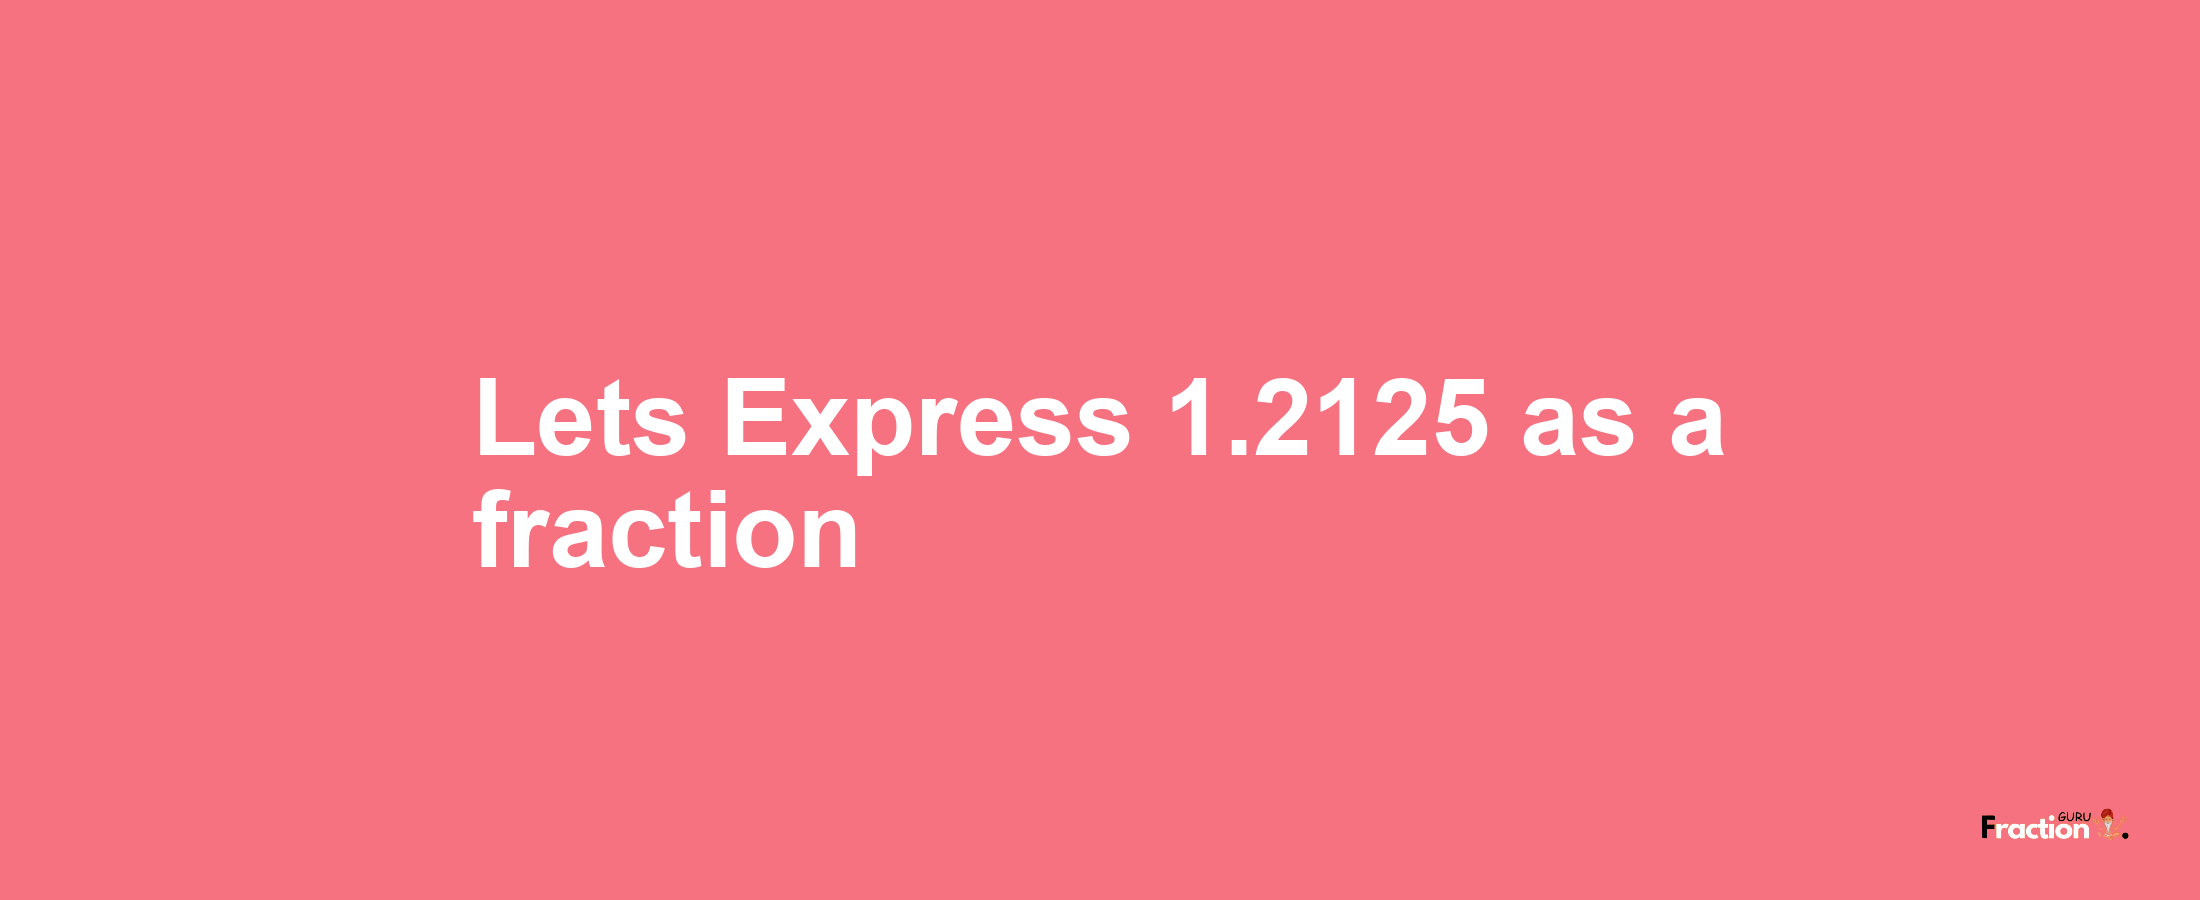 Lets Express 1.2125 as afraction